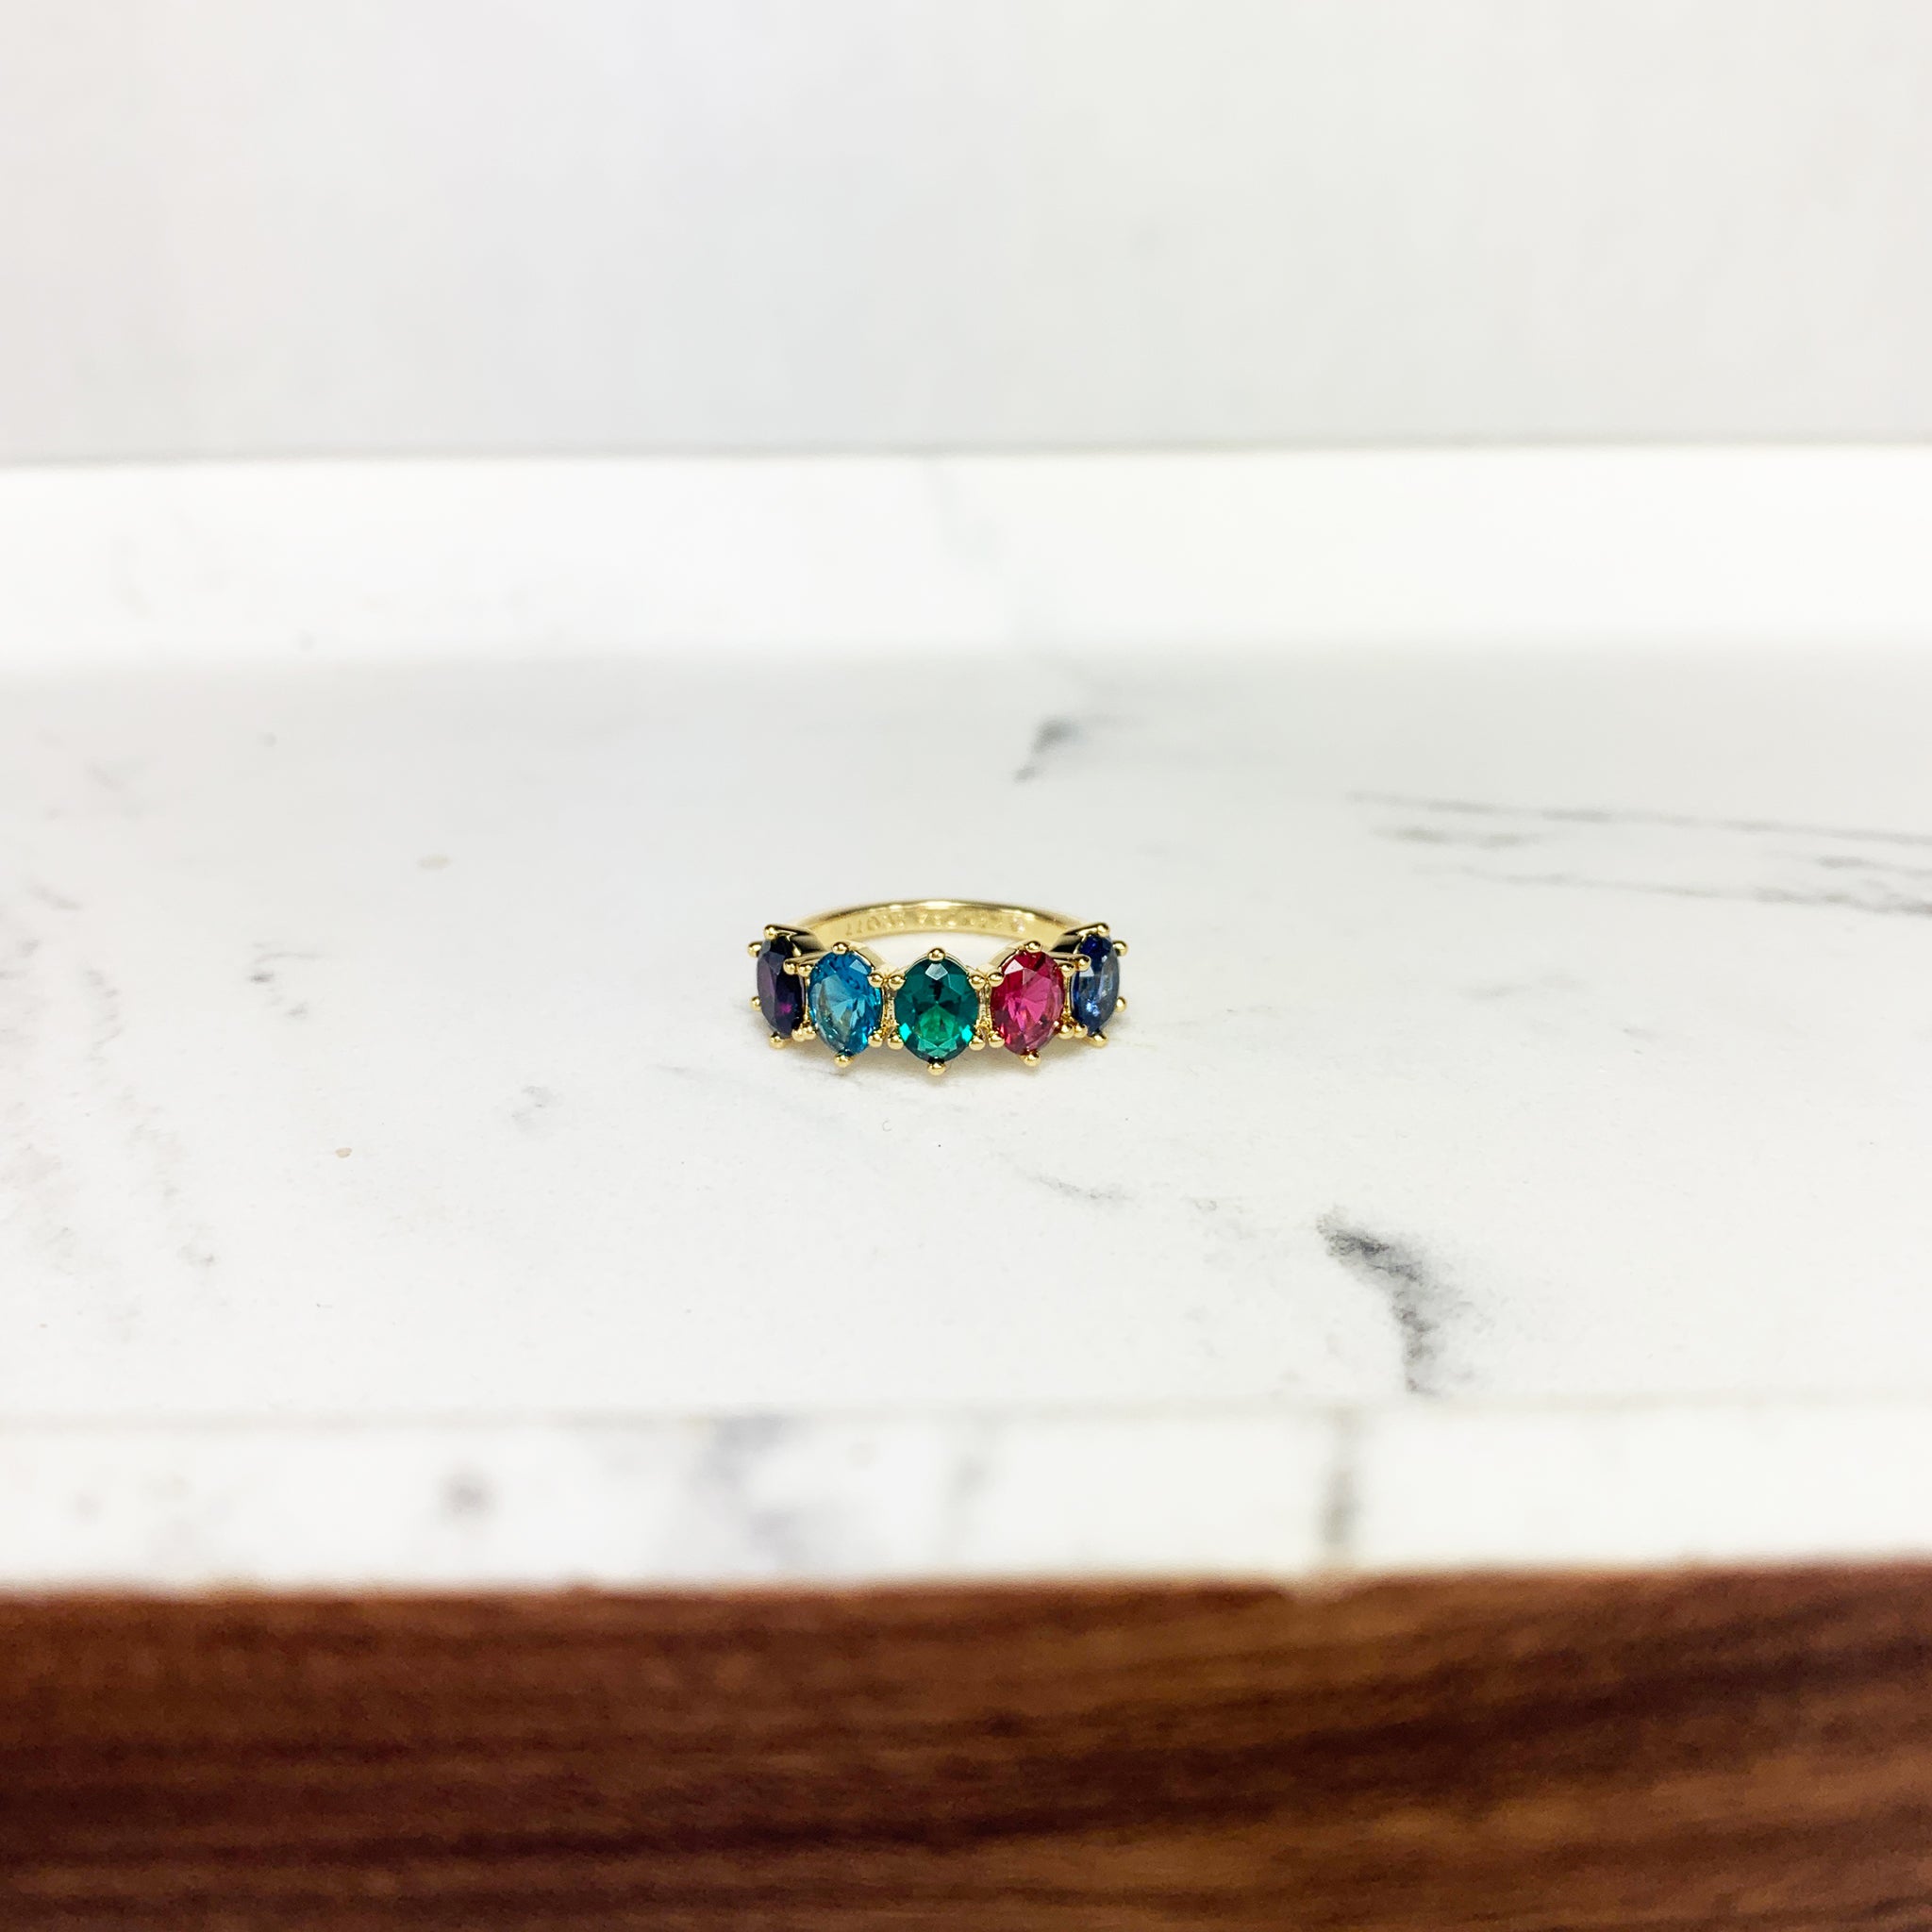 Kendra Scott Cailin Multi Stone Band Ring in Multi Mix and Gold Plated Size 6